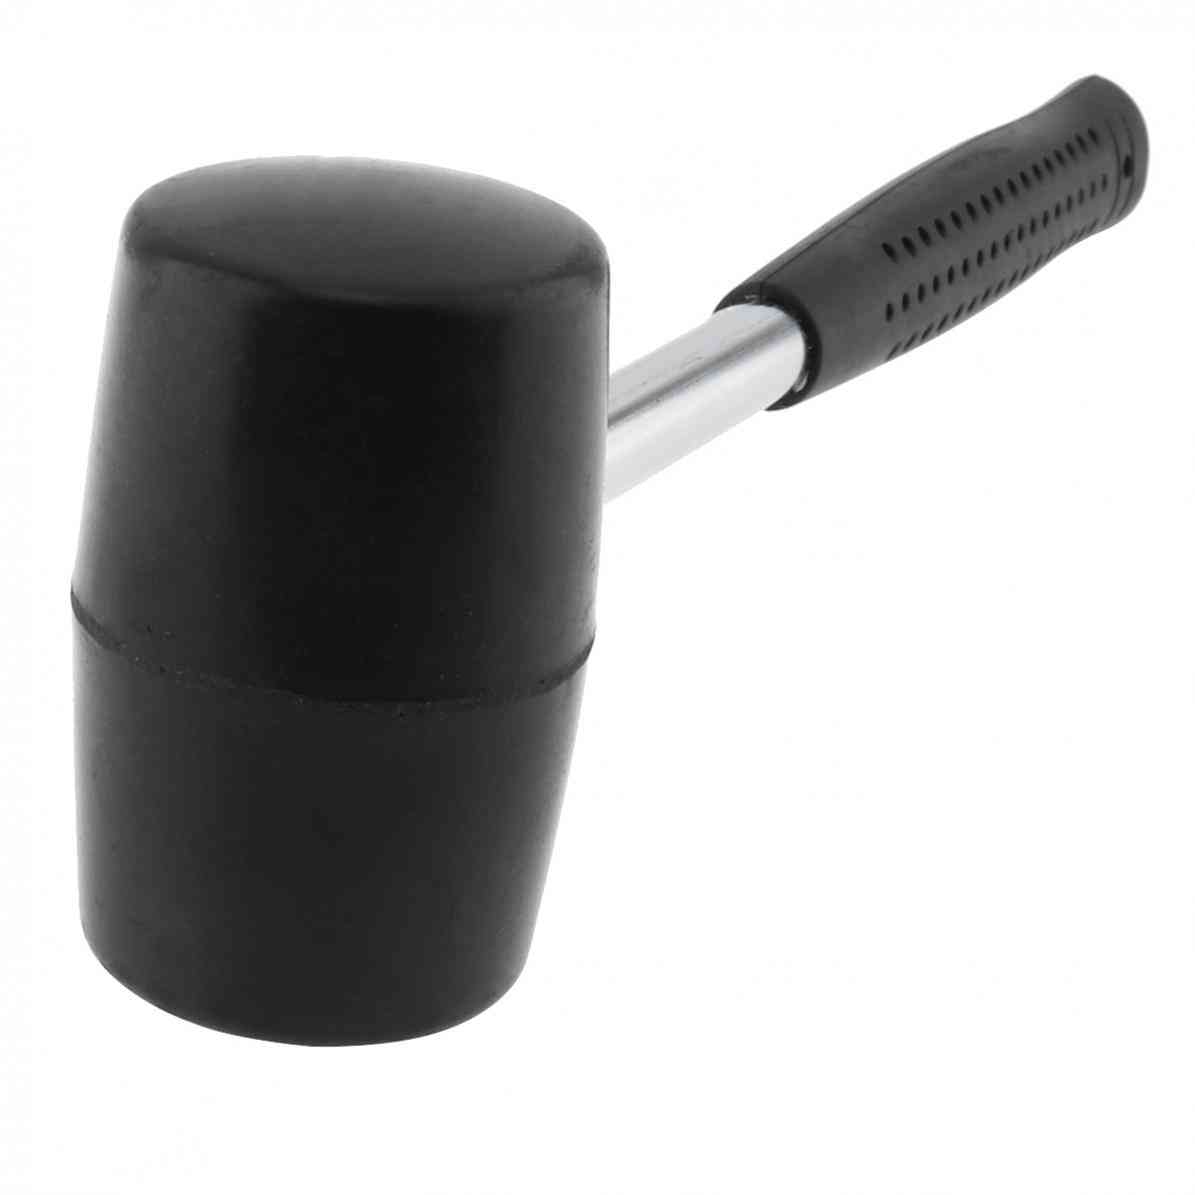 Non-elastic Rubber, Wear-resistant, Tile Hammer With Round Head, Handle Hand Tool